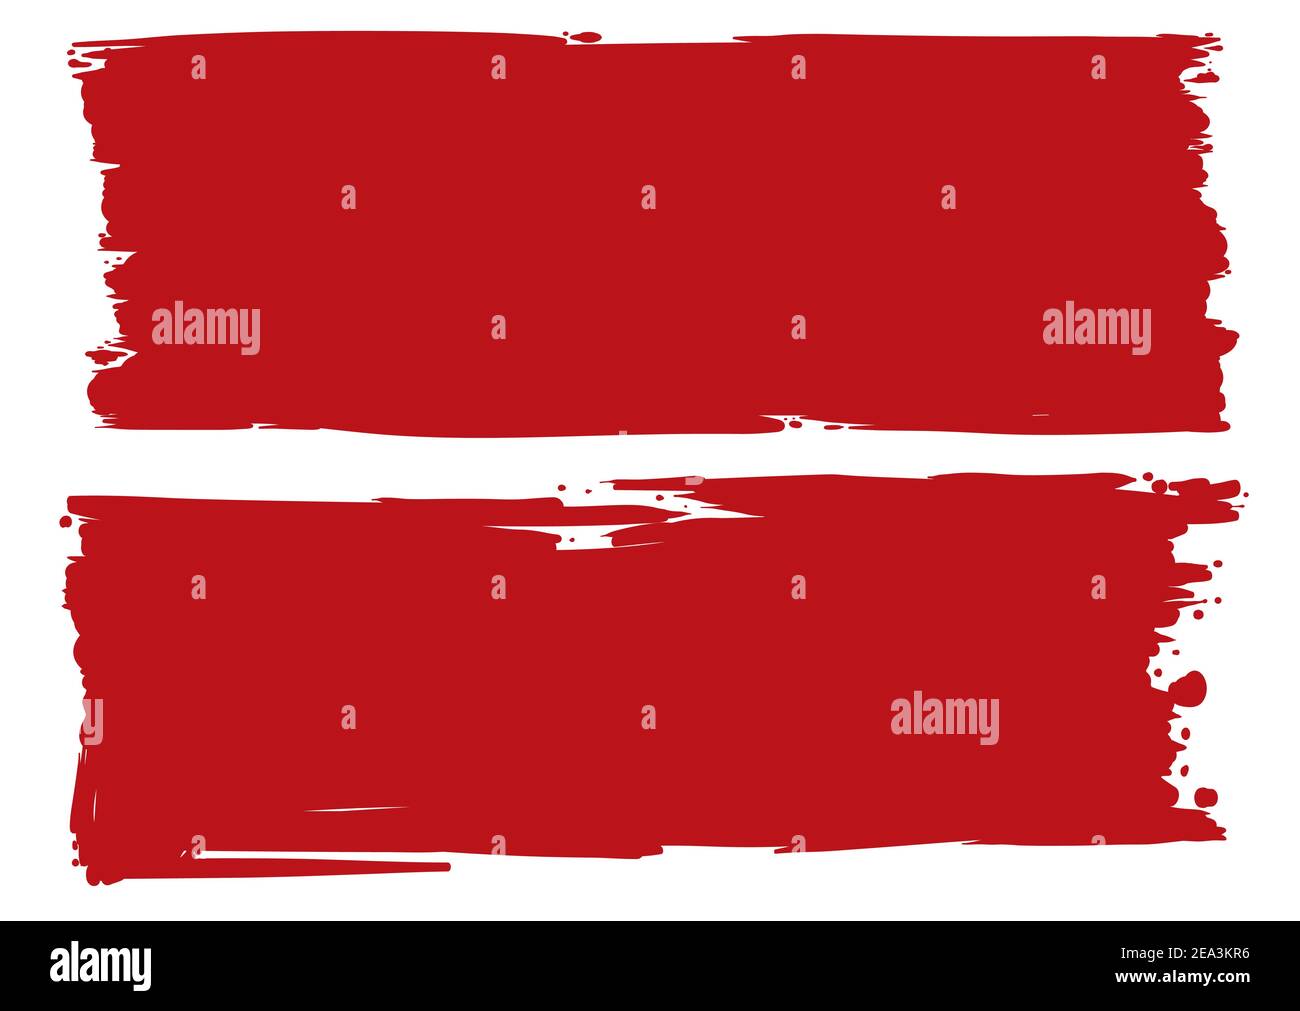 Couple of red and horizontal brush strokes template, isolated over white background. Stock Vector